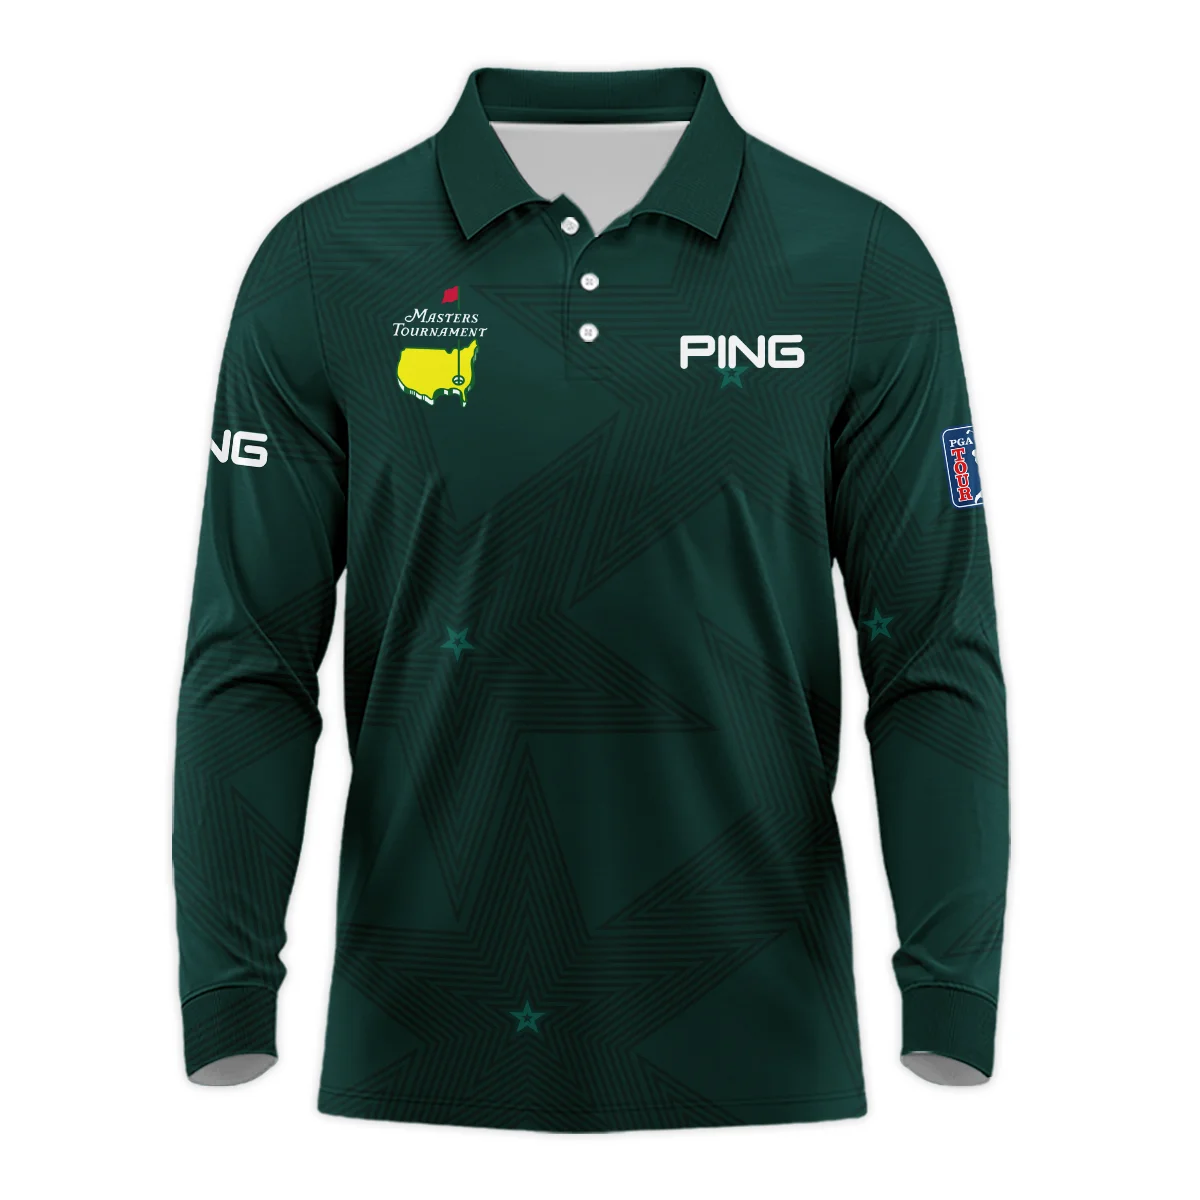 Dark Green Background Masters Tournament Ping Vneck Long Polo Shirt Style Classic Long Polo Shirt For Men